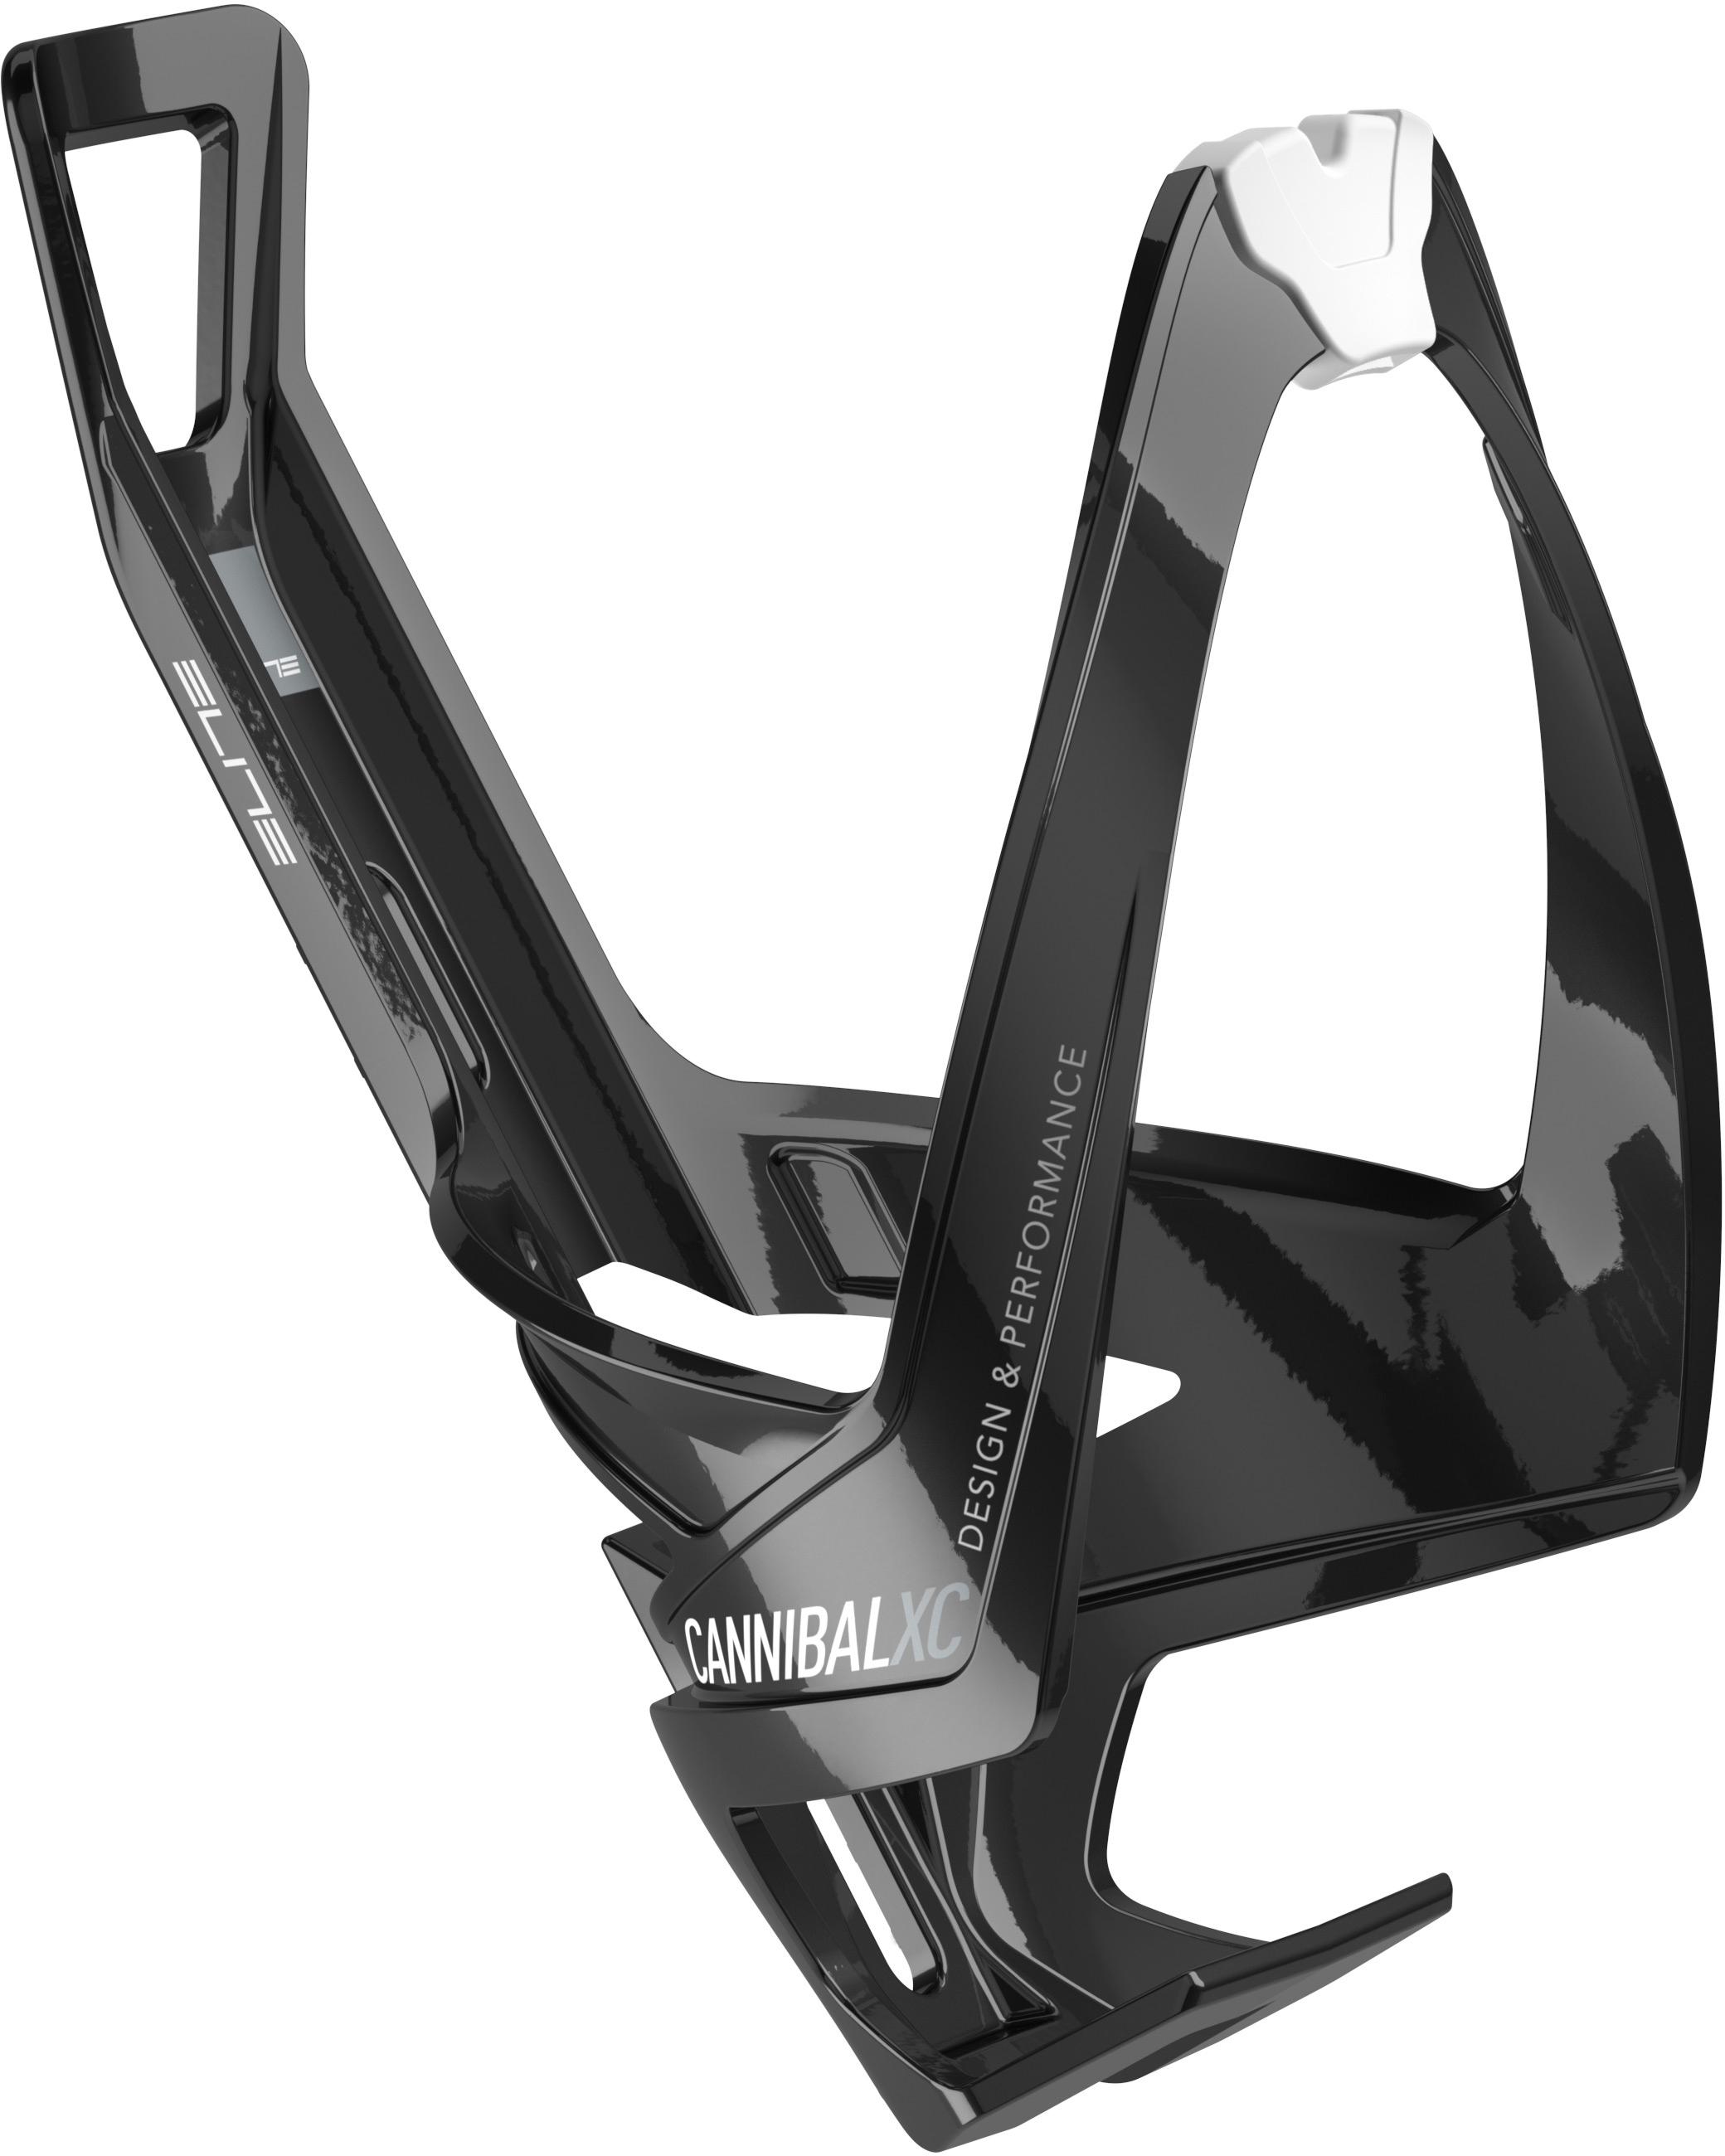 Cannibal Xc Bottle Cage Gloss Black / White